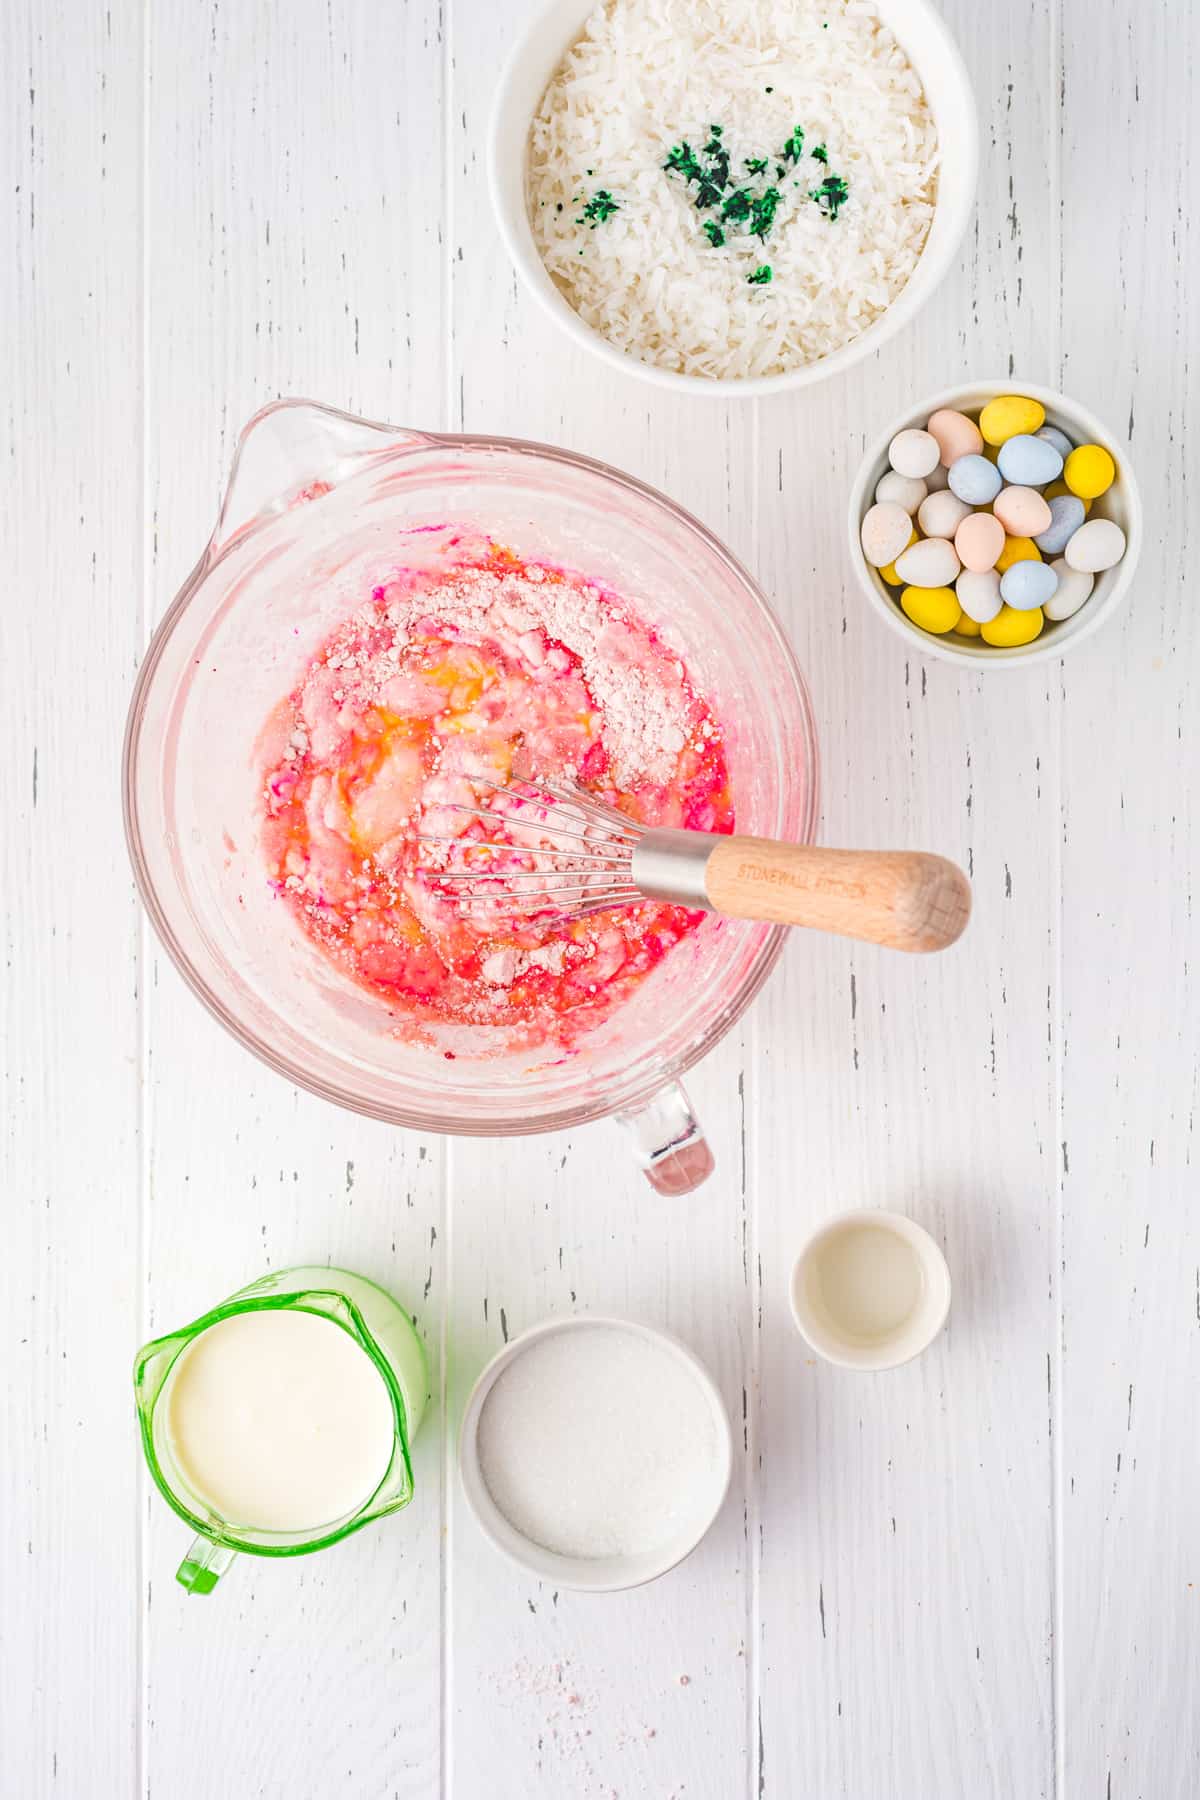 Mixing strawberry cake batter in large glass mixing bowl.